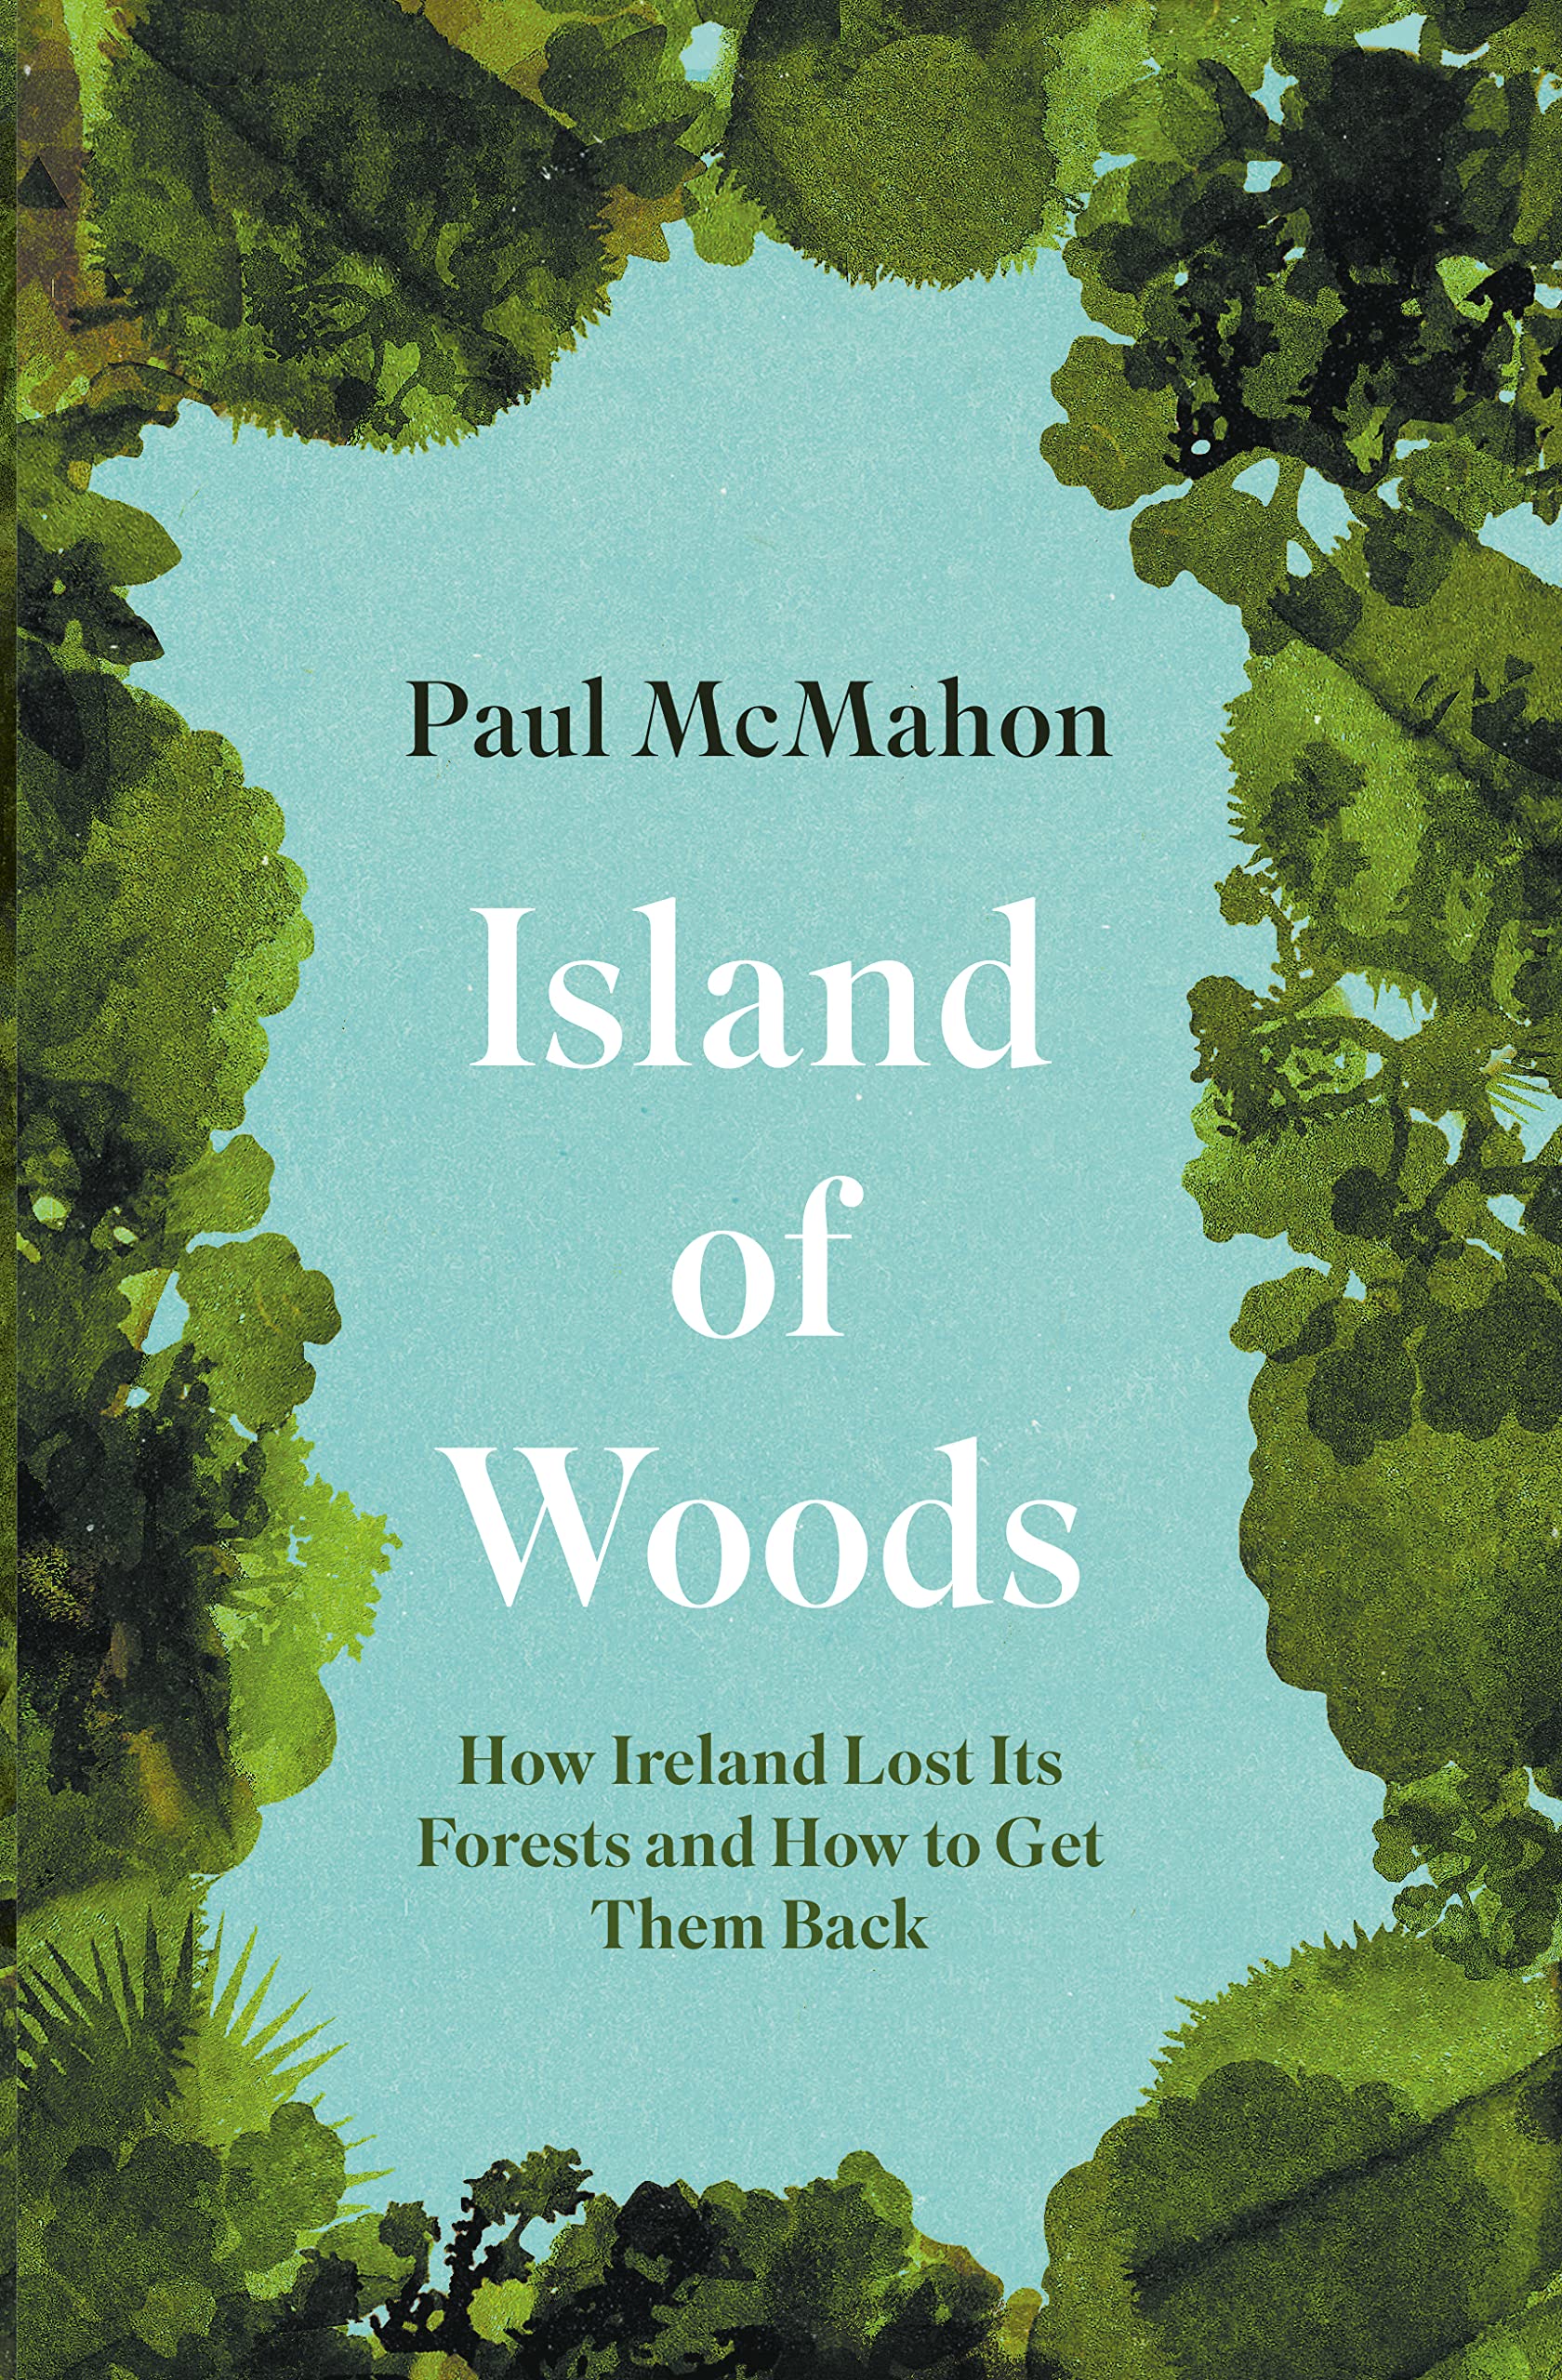 Island of Woods: How Ireland Lost its Forests and How to Get them Back by Paul McMahon.